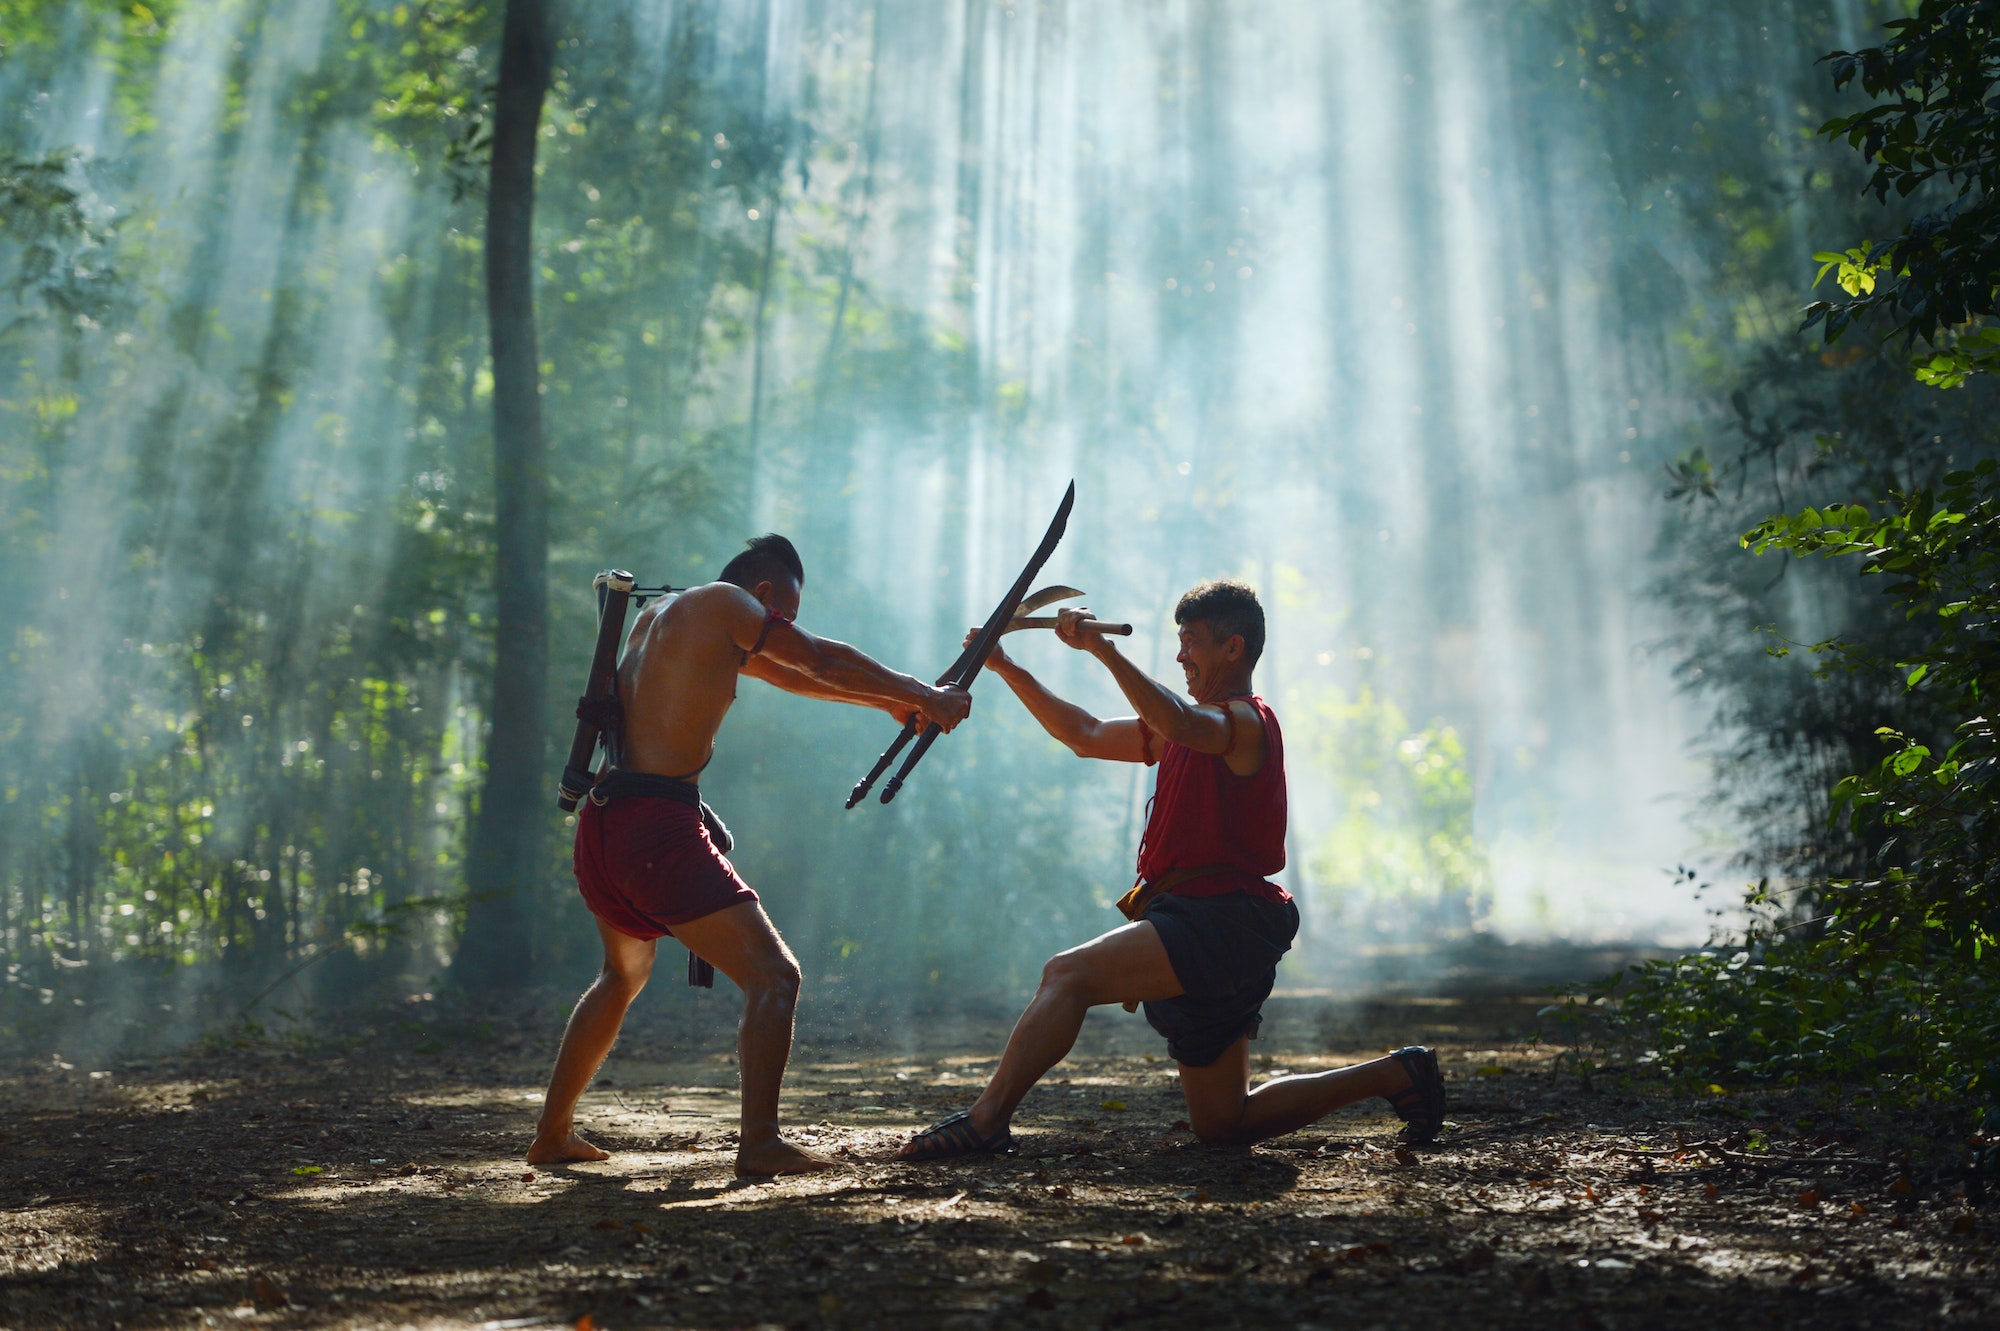 Two men fighting with sticks in the woods